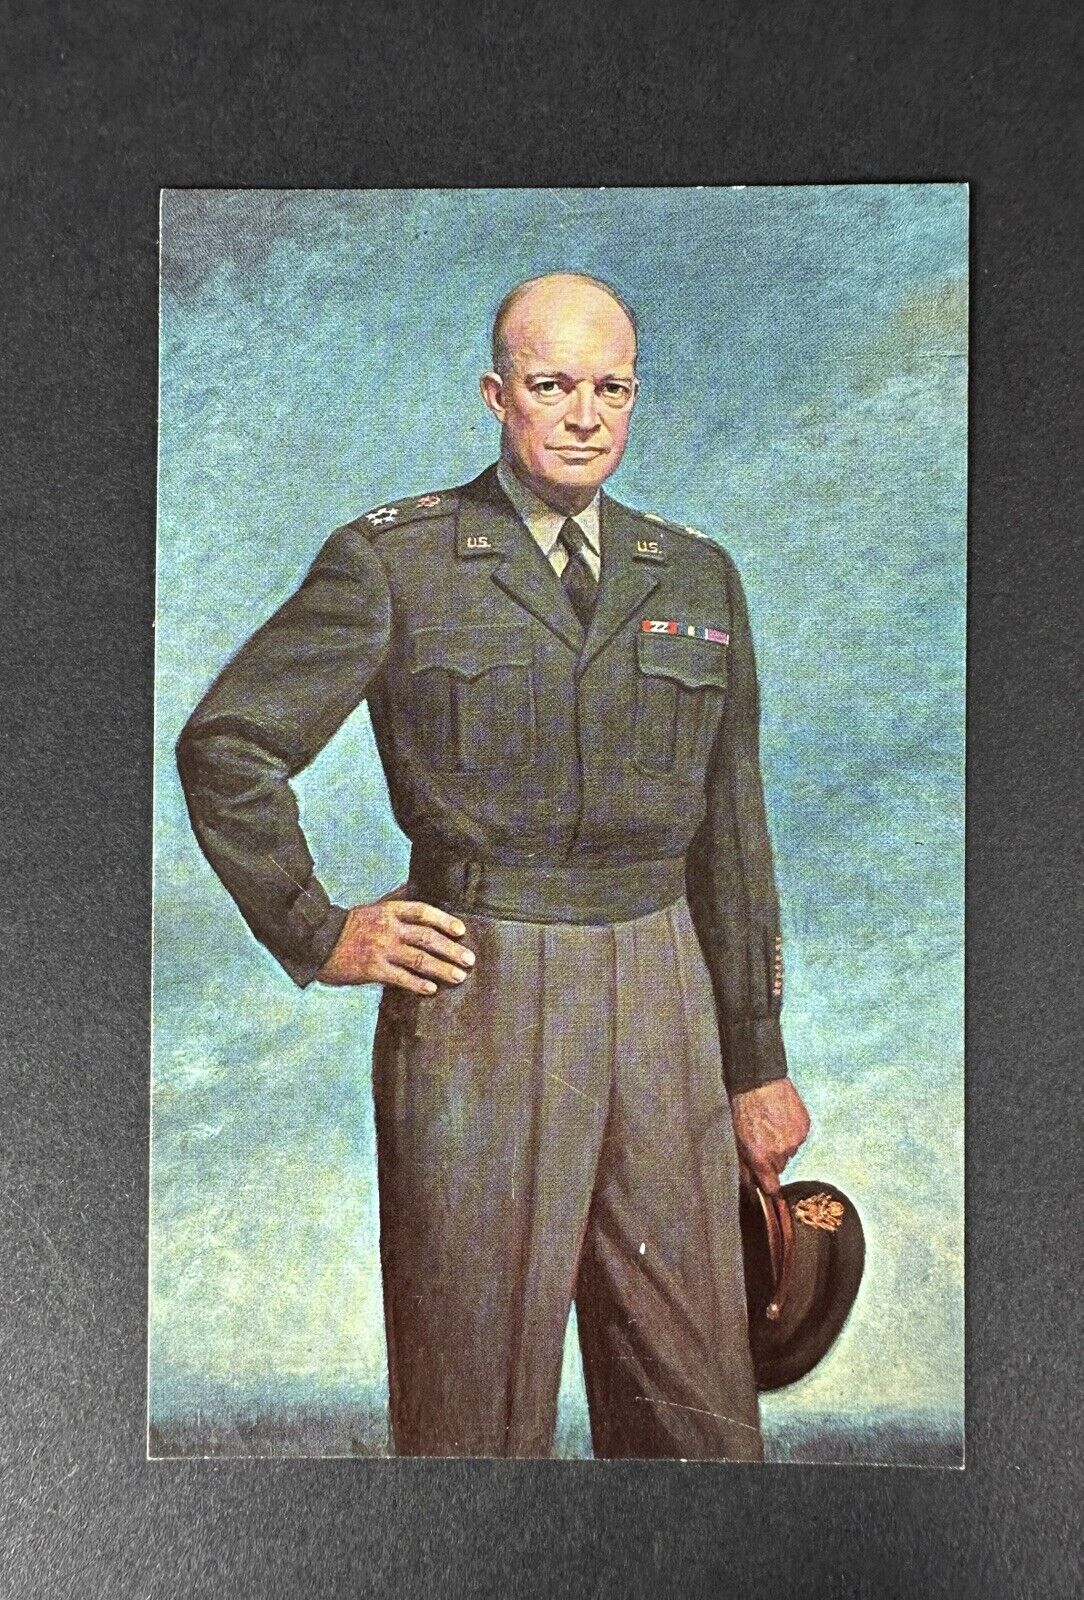 Postcard General Of The Army, Dwight D. Eisenhower By Thomas E. Stephens Vintage